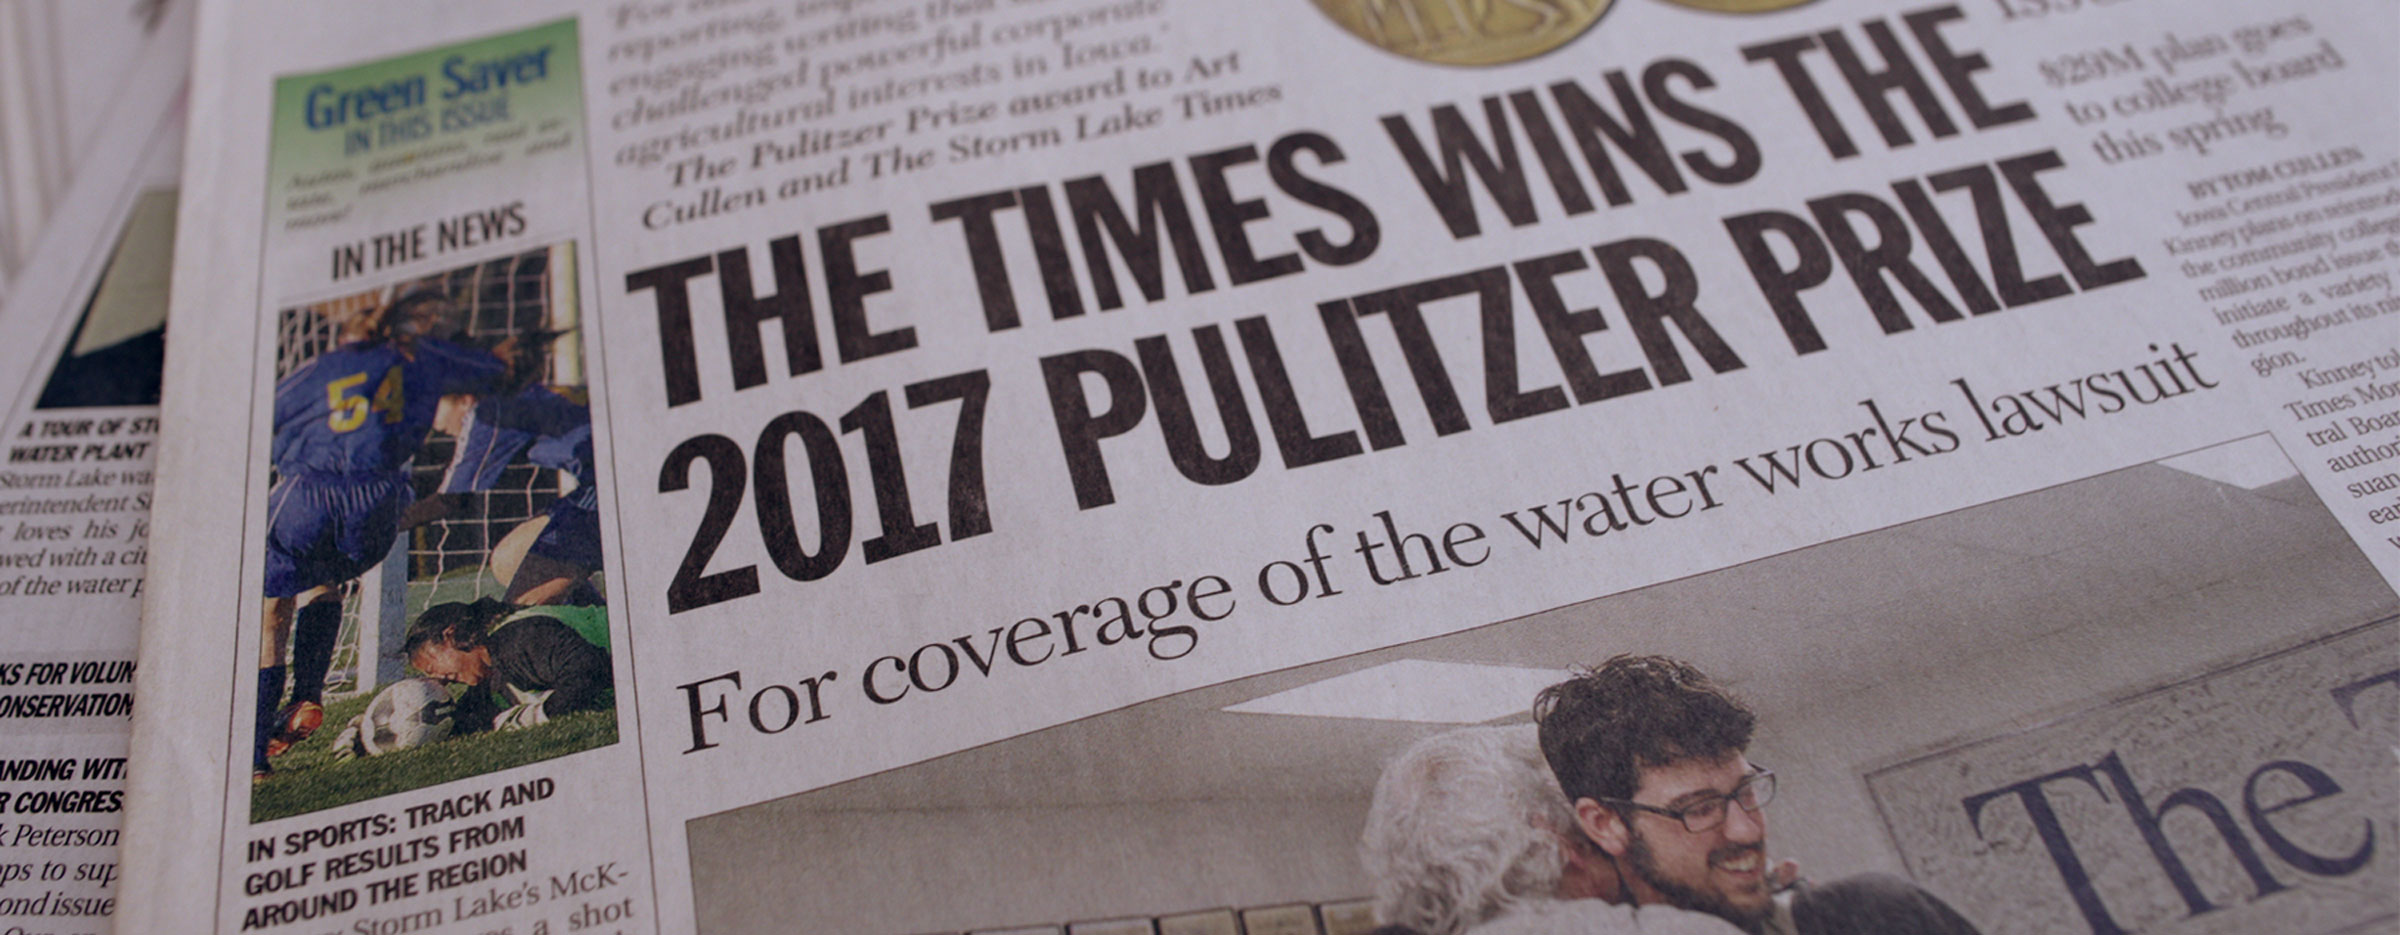 Storm Lake newspaper closeup, "The Times Wins the Pulitzer Prize"